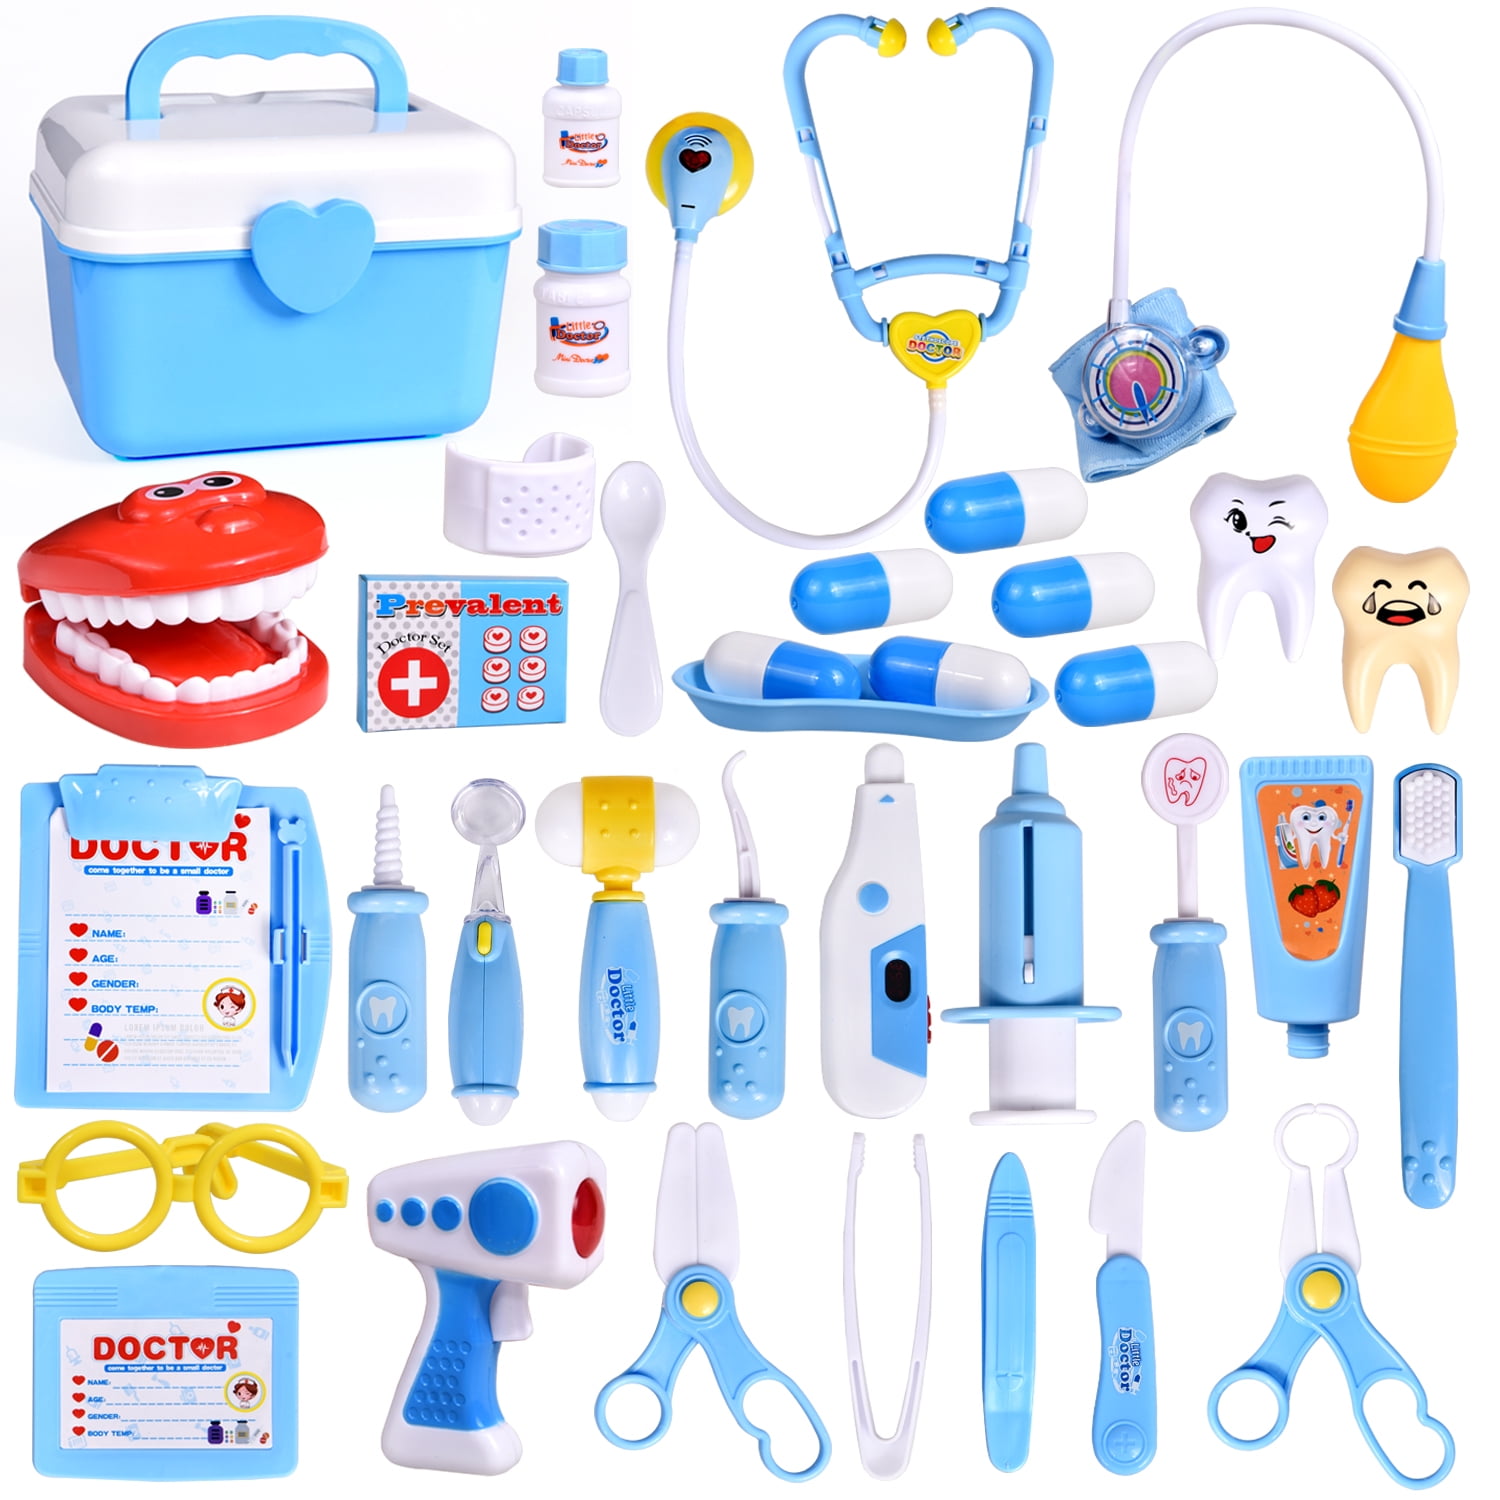 learning resources doctor set